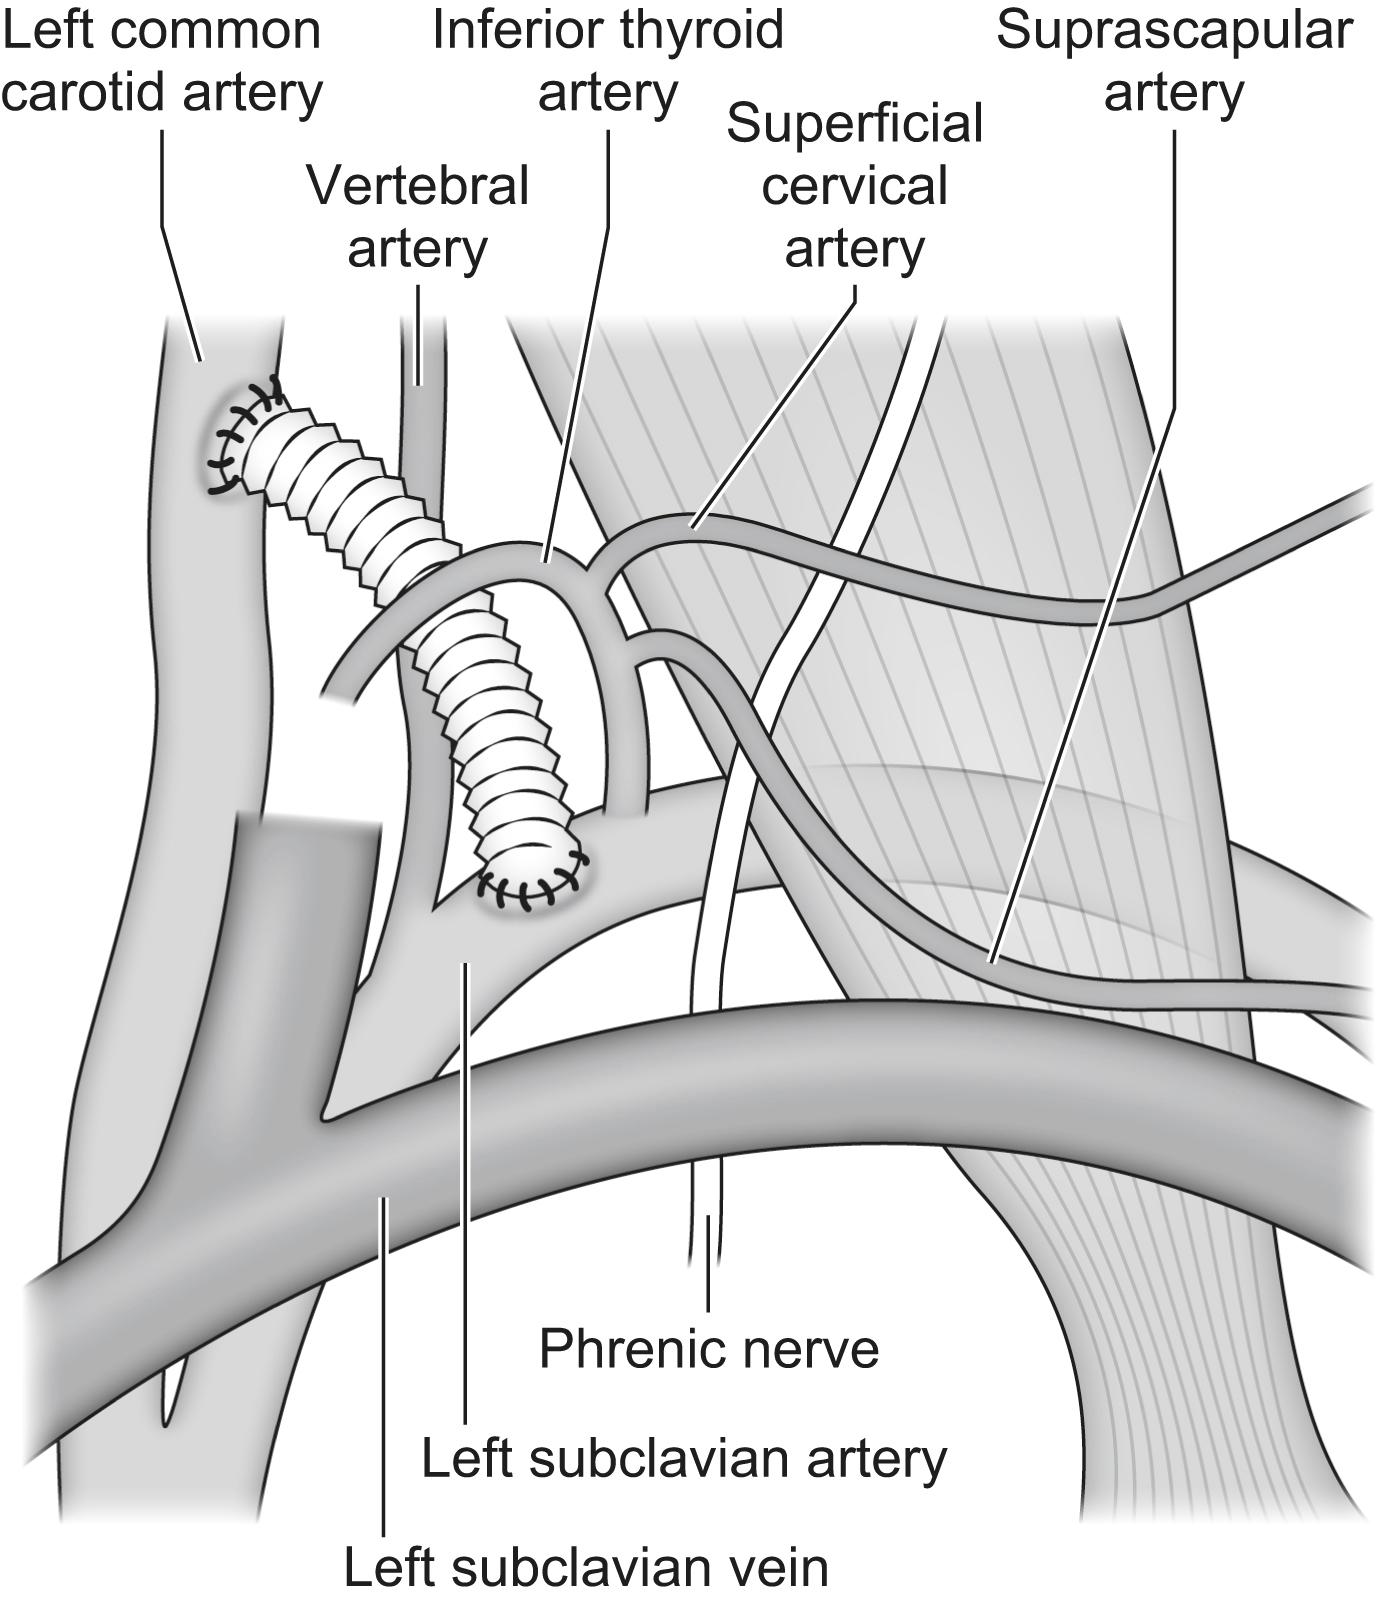 Figure 14.3, Carotid subclavian bypass performed selectively before thoracic endovascular aortic repair (TEVAR) where coverage of the origin of the vessel is required.